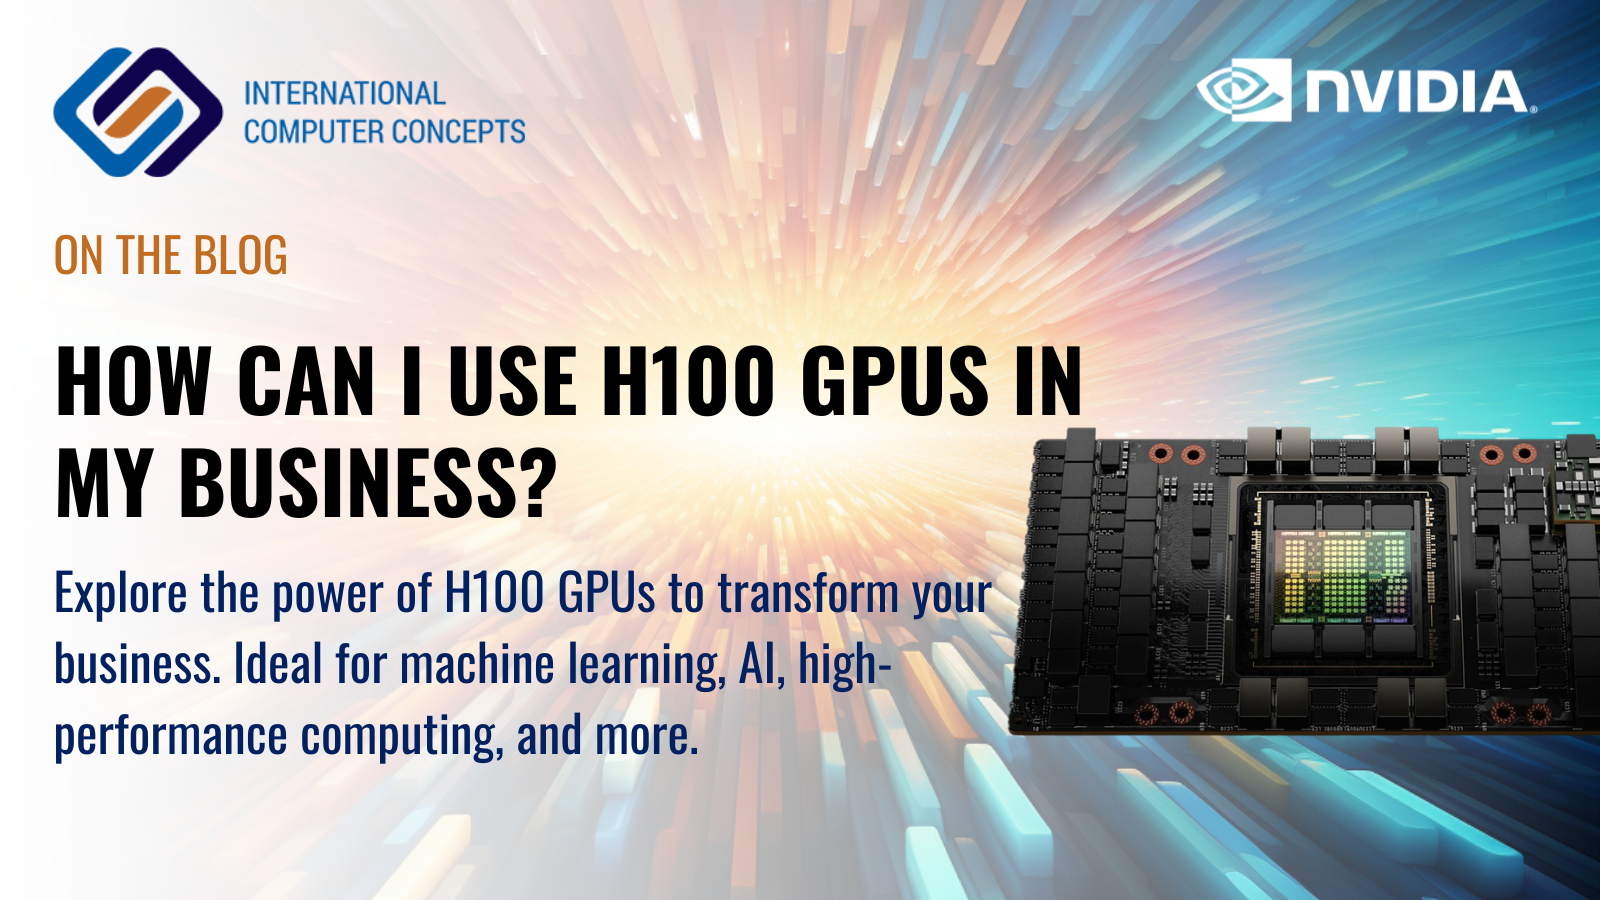 How can I use H100 GPUs in my business?